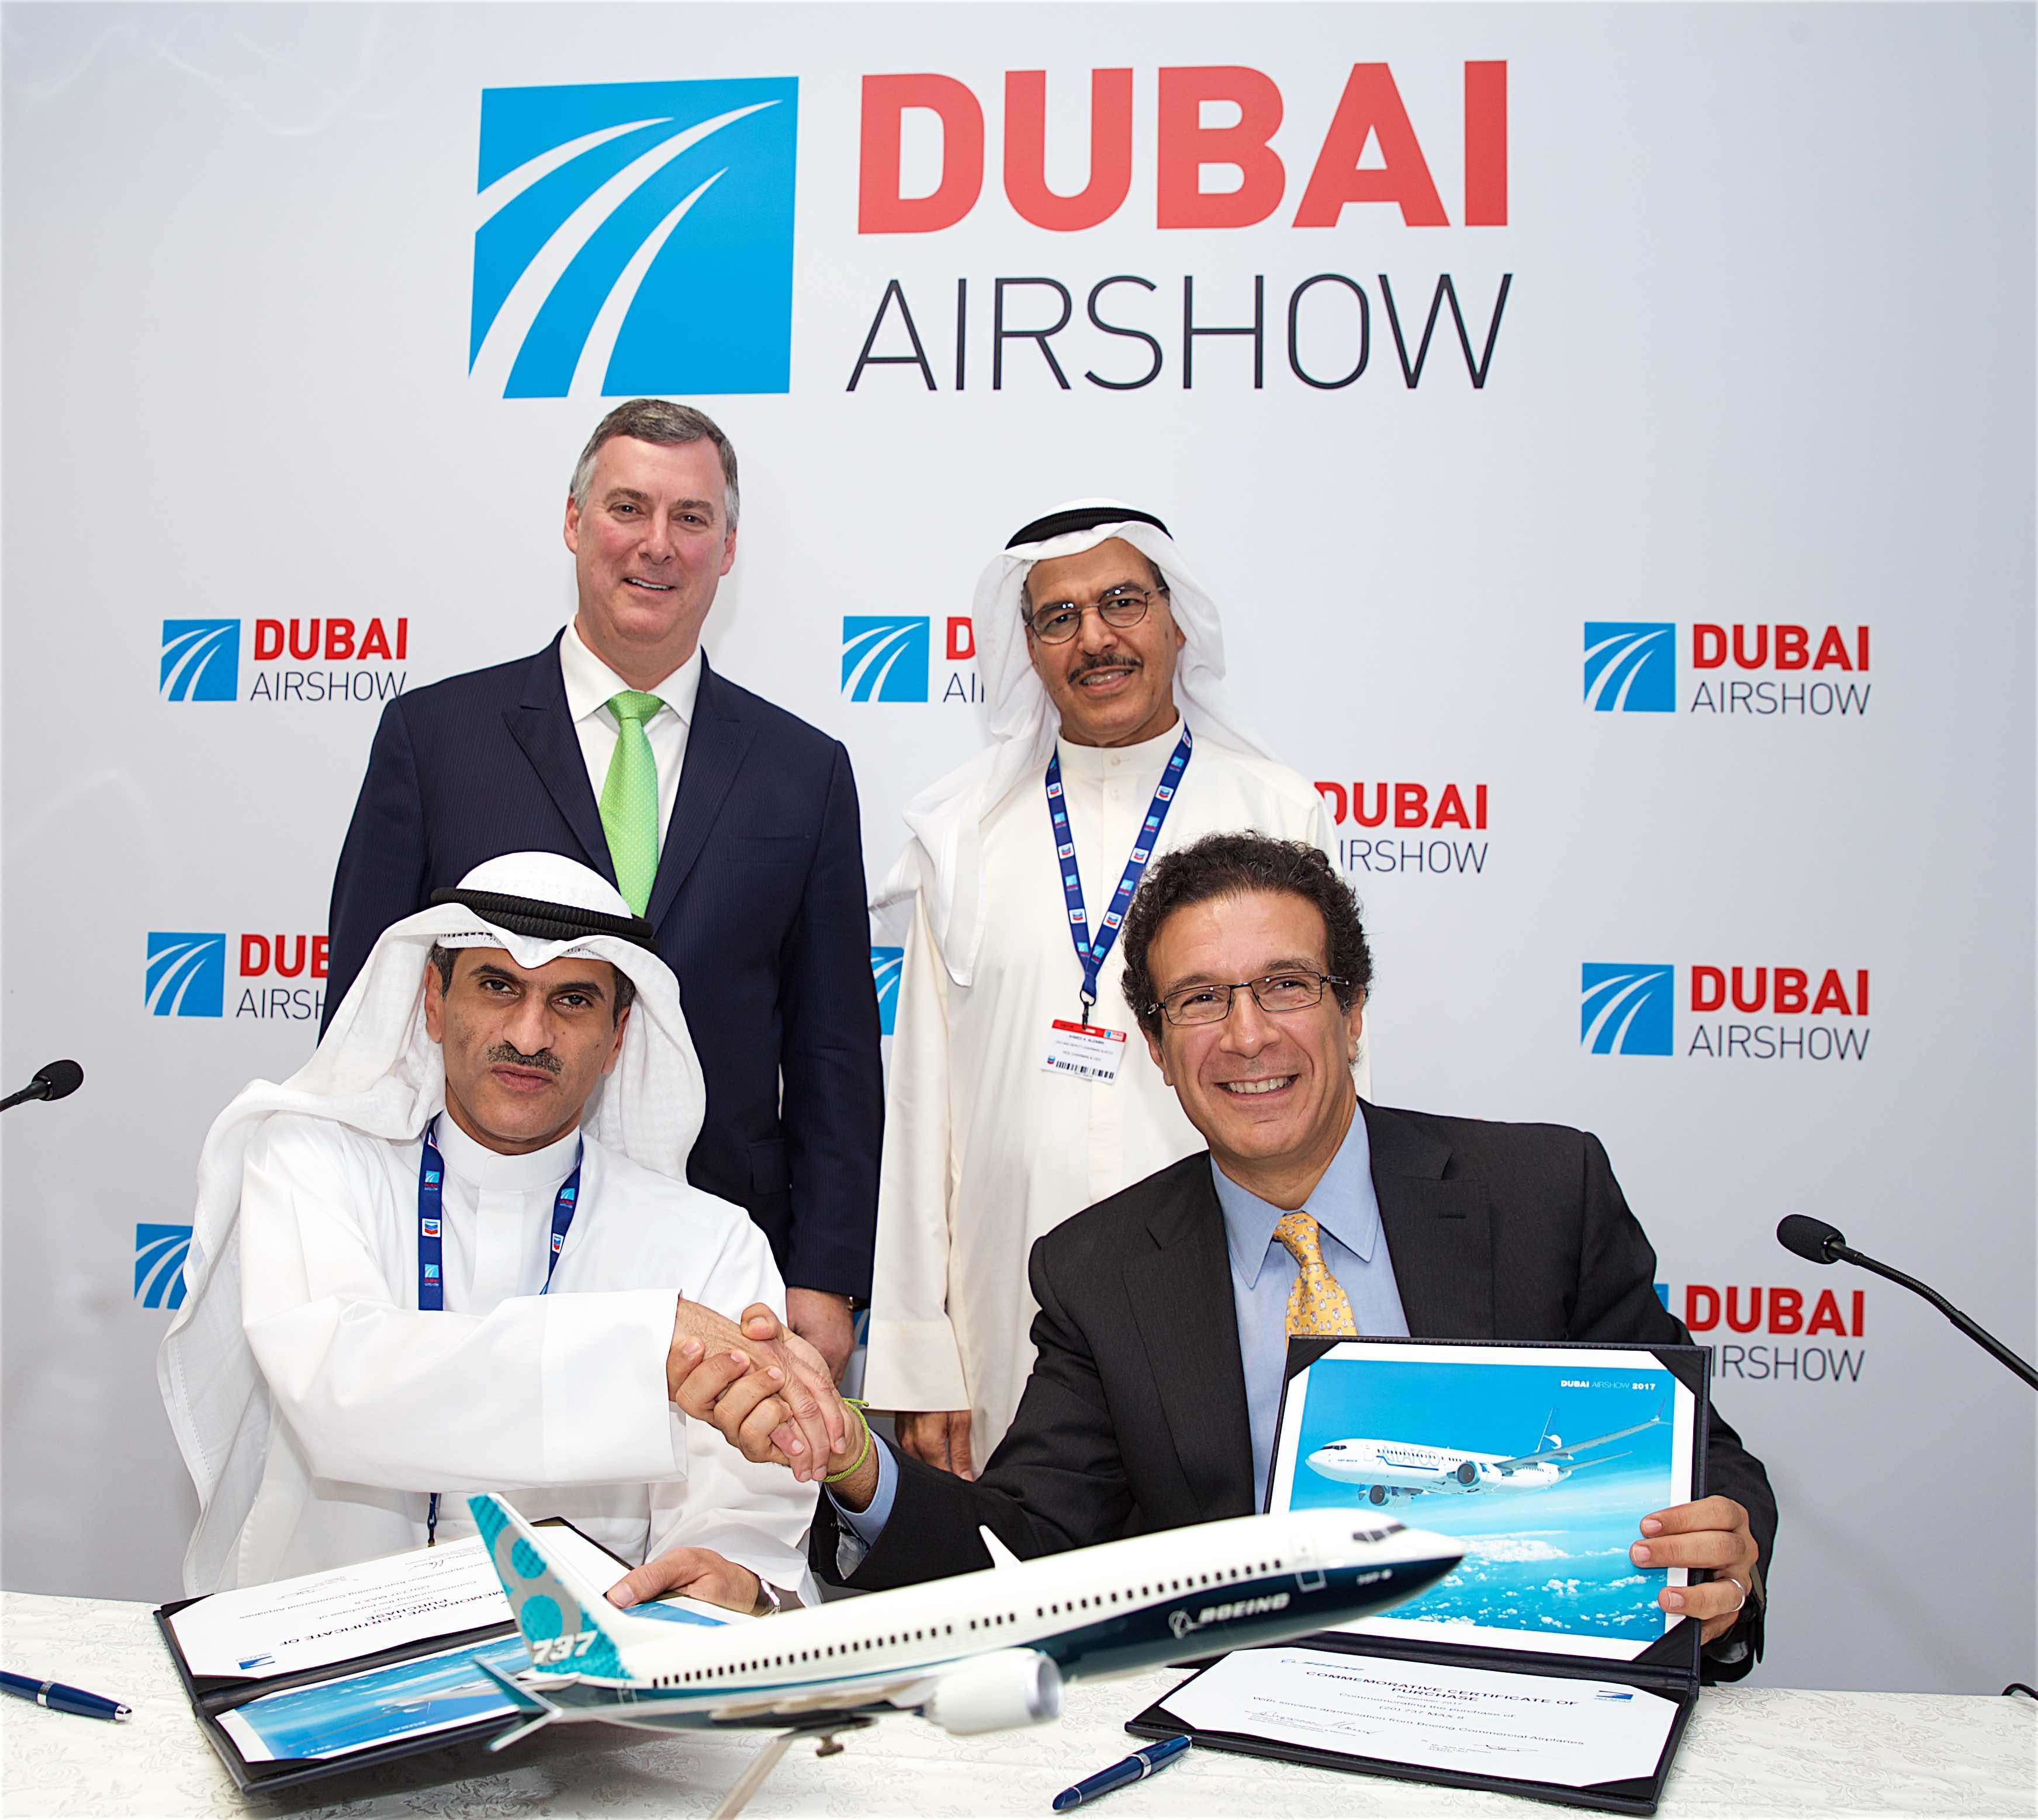 ALAFCO's deputy CEO Adel Al-Banwan and the executive vice president of Boeing Kevin McAllister